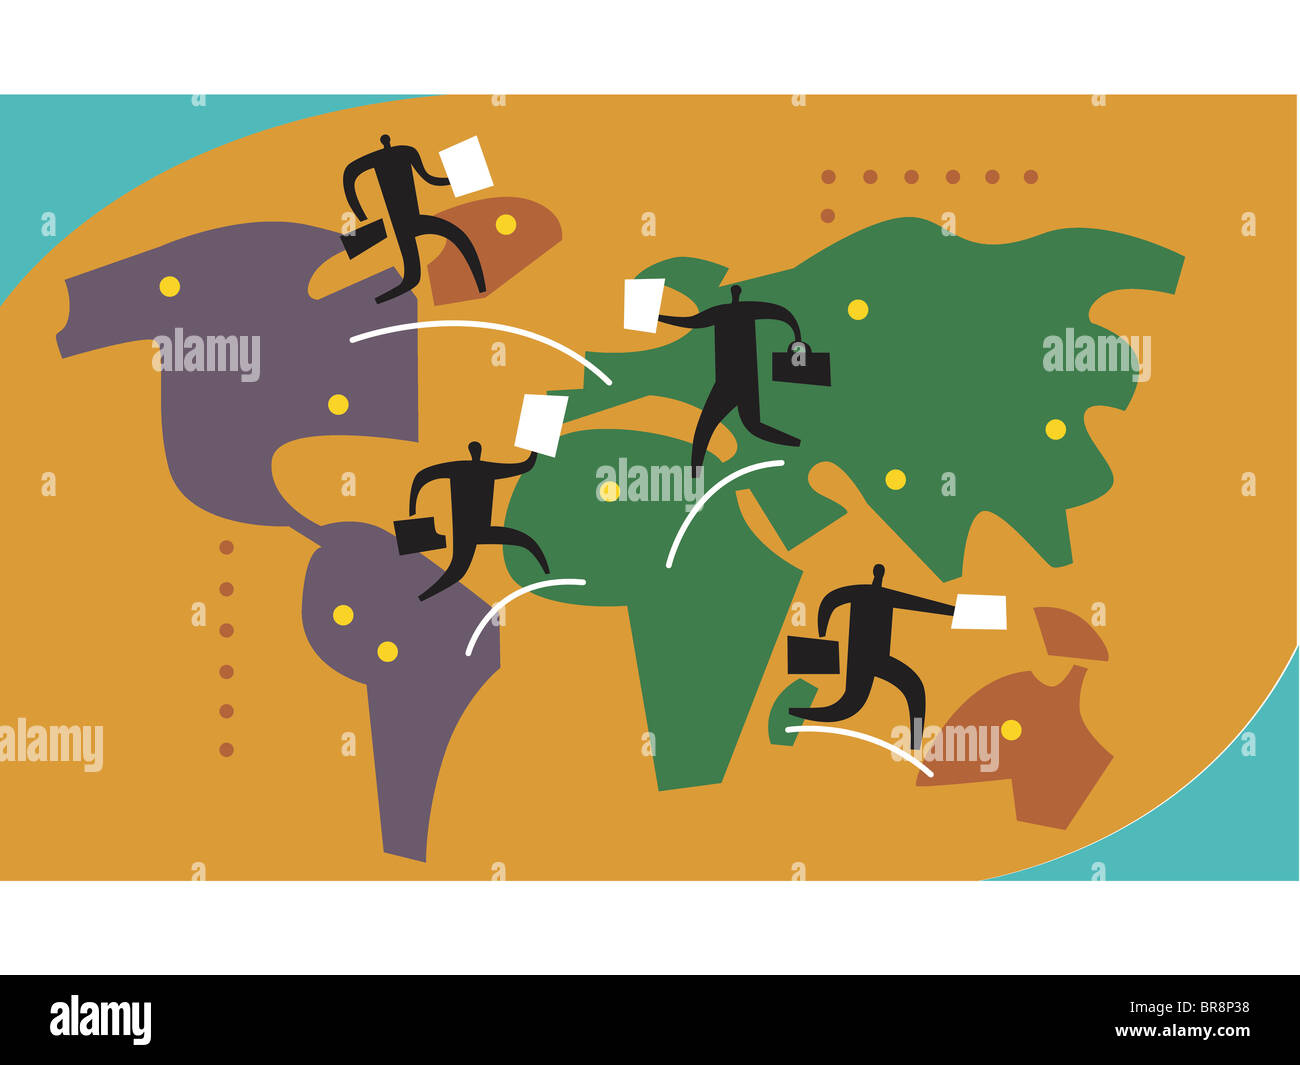 An illustration of business destinations around the world Stock Photo